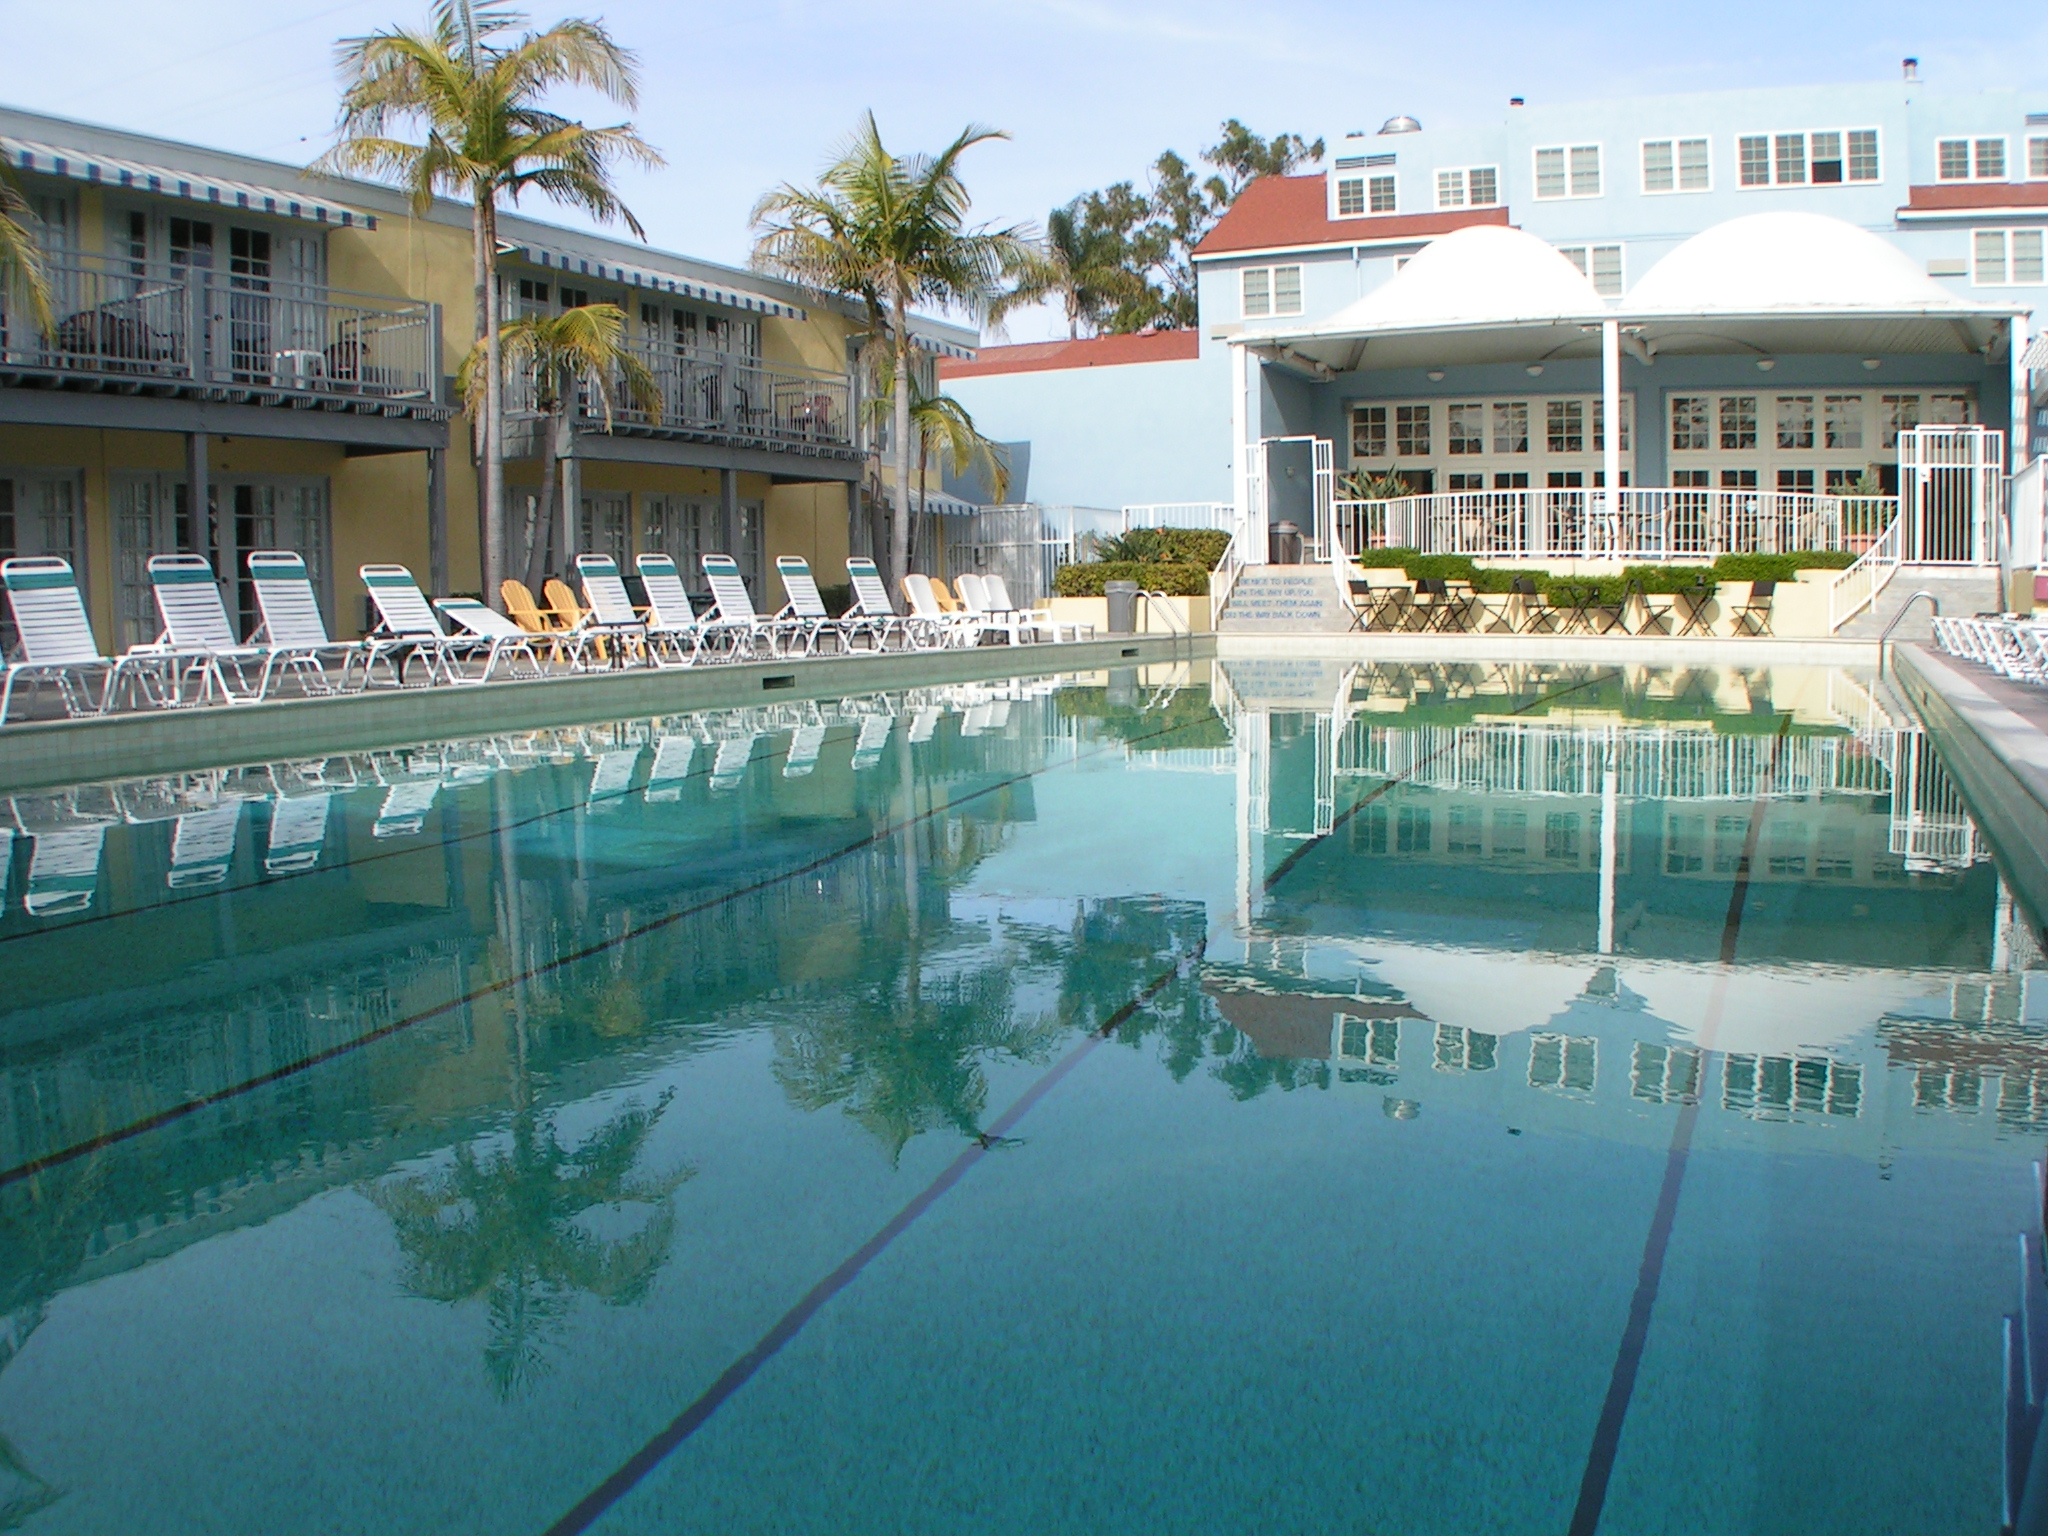 The heat generated by the ClearEdge Power fuel cells can keep the Lafayette Hotel's historic pool heated year-round.